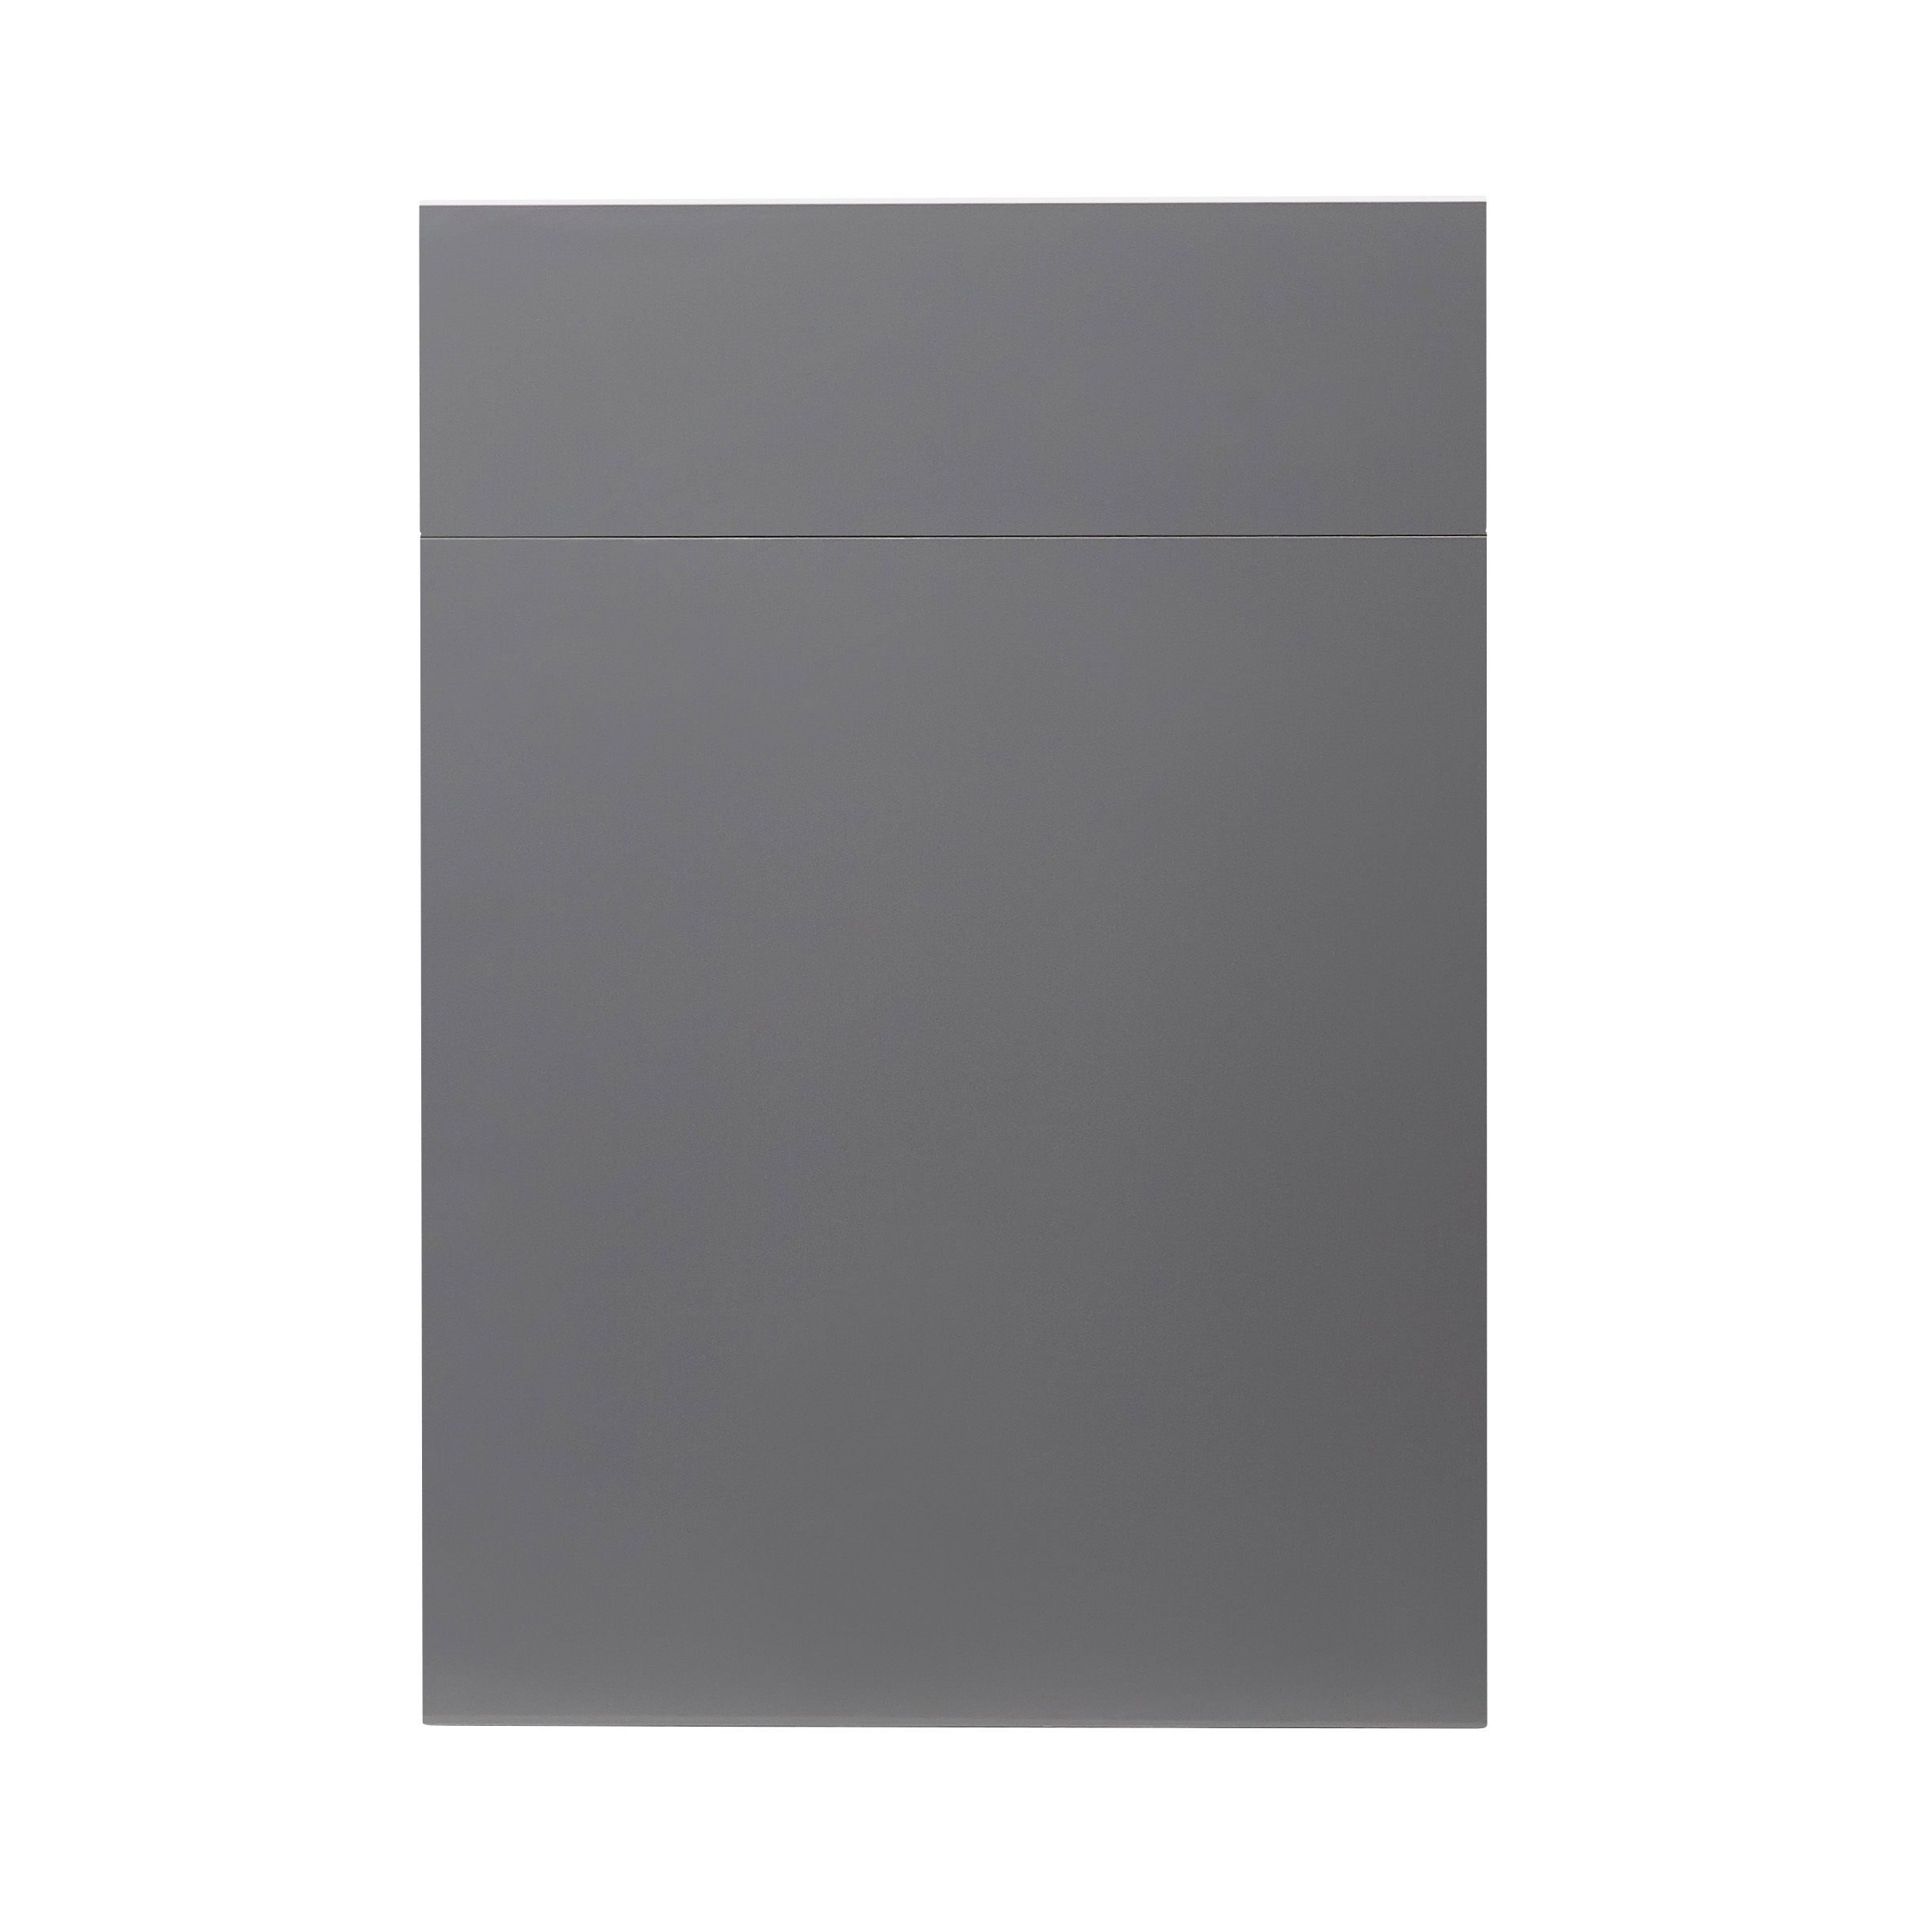 GoodHome Stevia Gloss anthracite slab Drawerline Cabinet door, (W)600mm (H)715mm (T)18mm